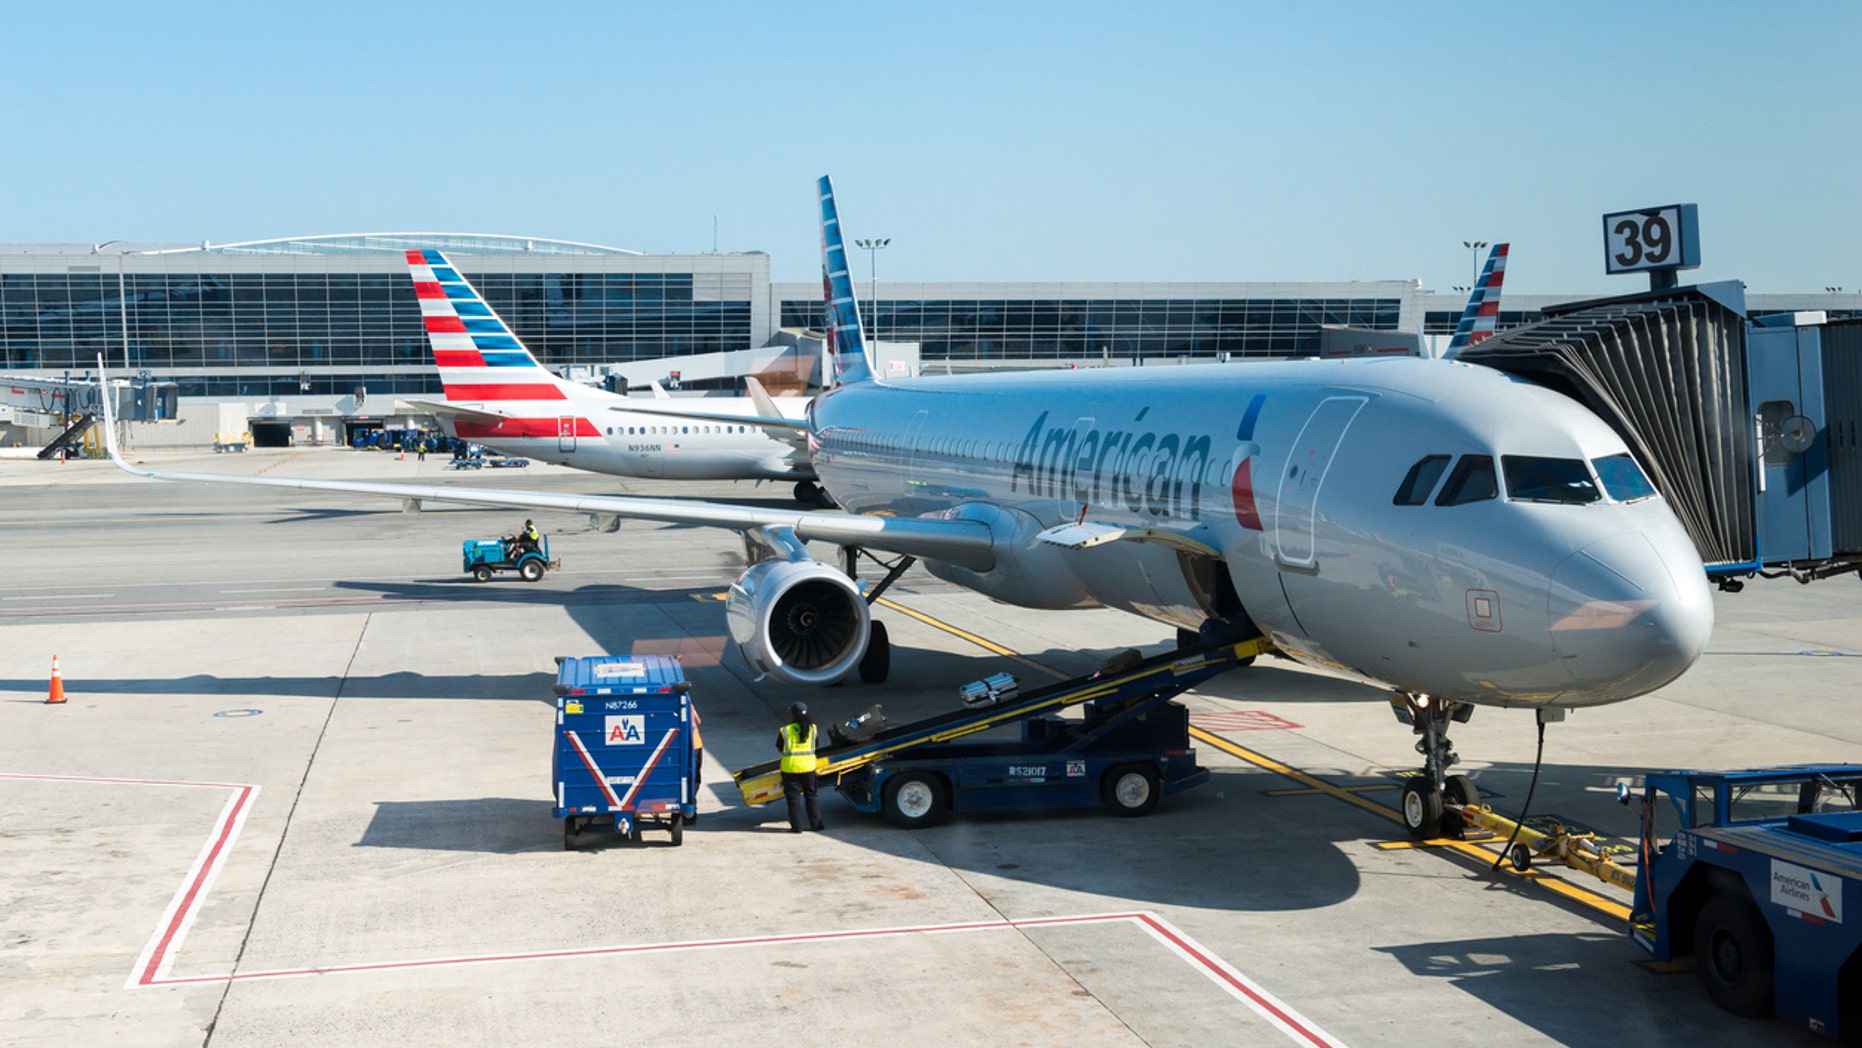 American Airlines flight makes emergency landing after passengers say